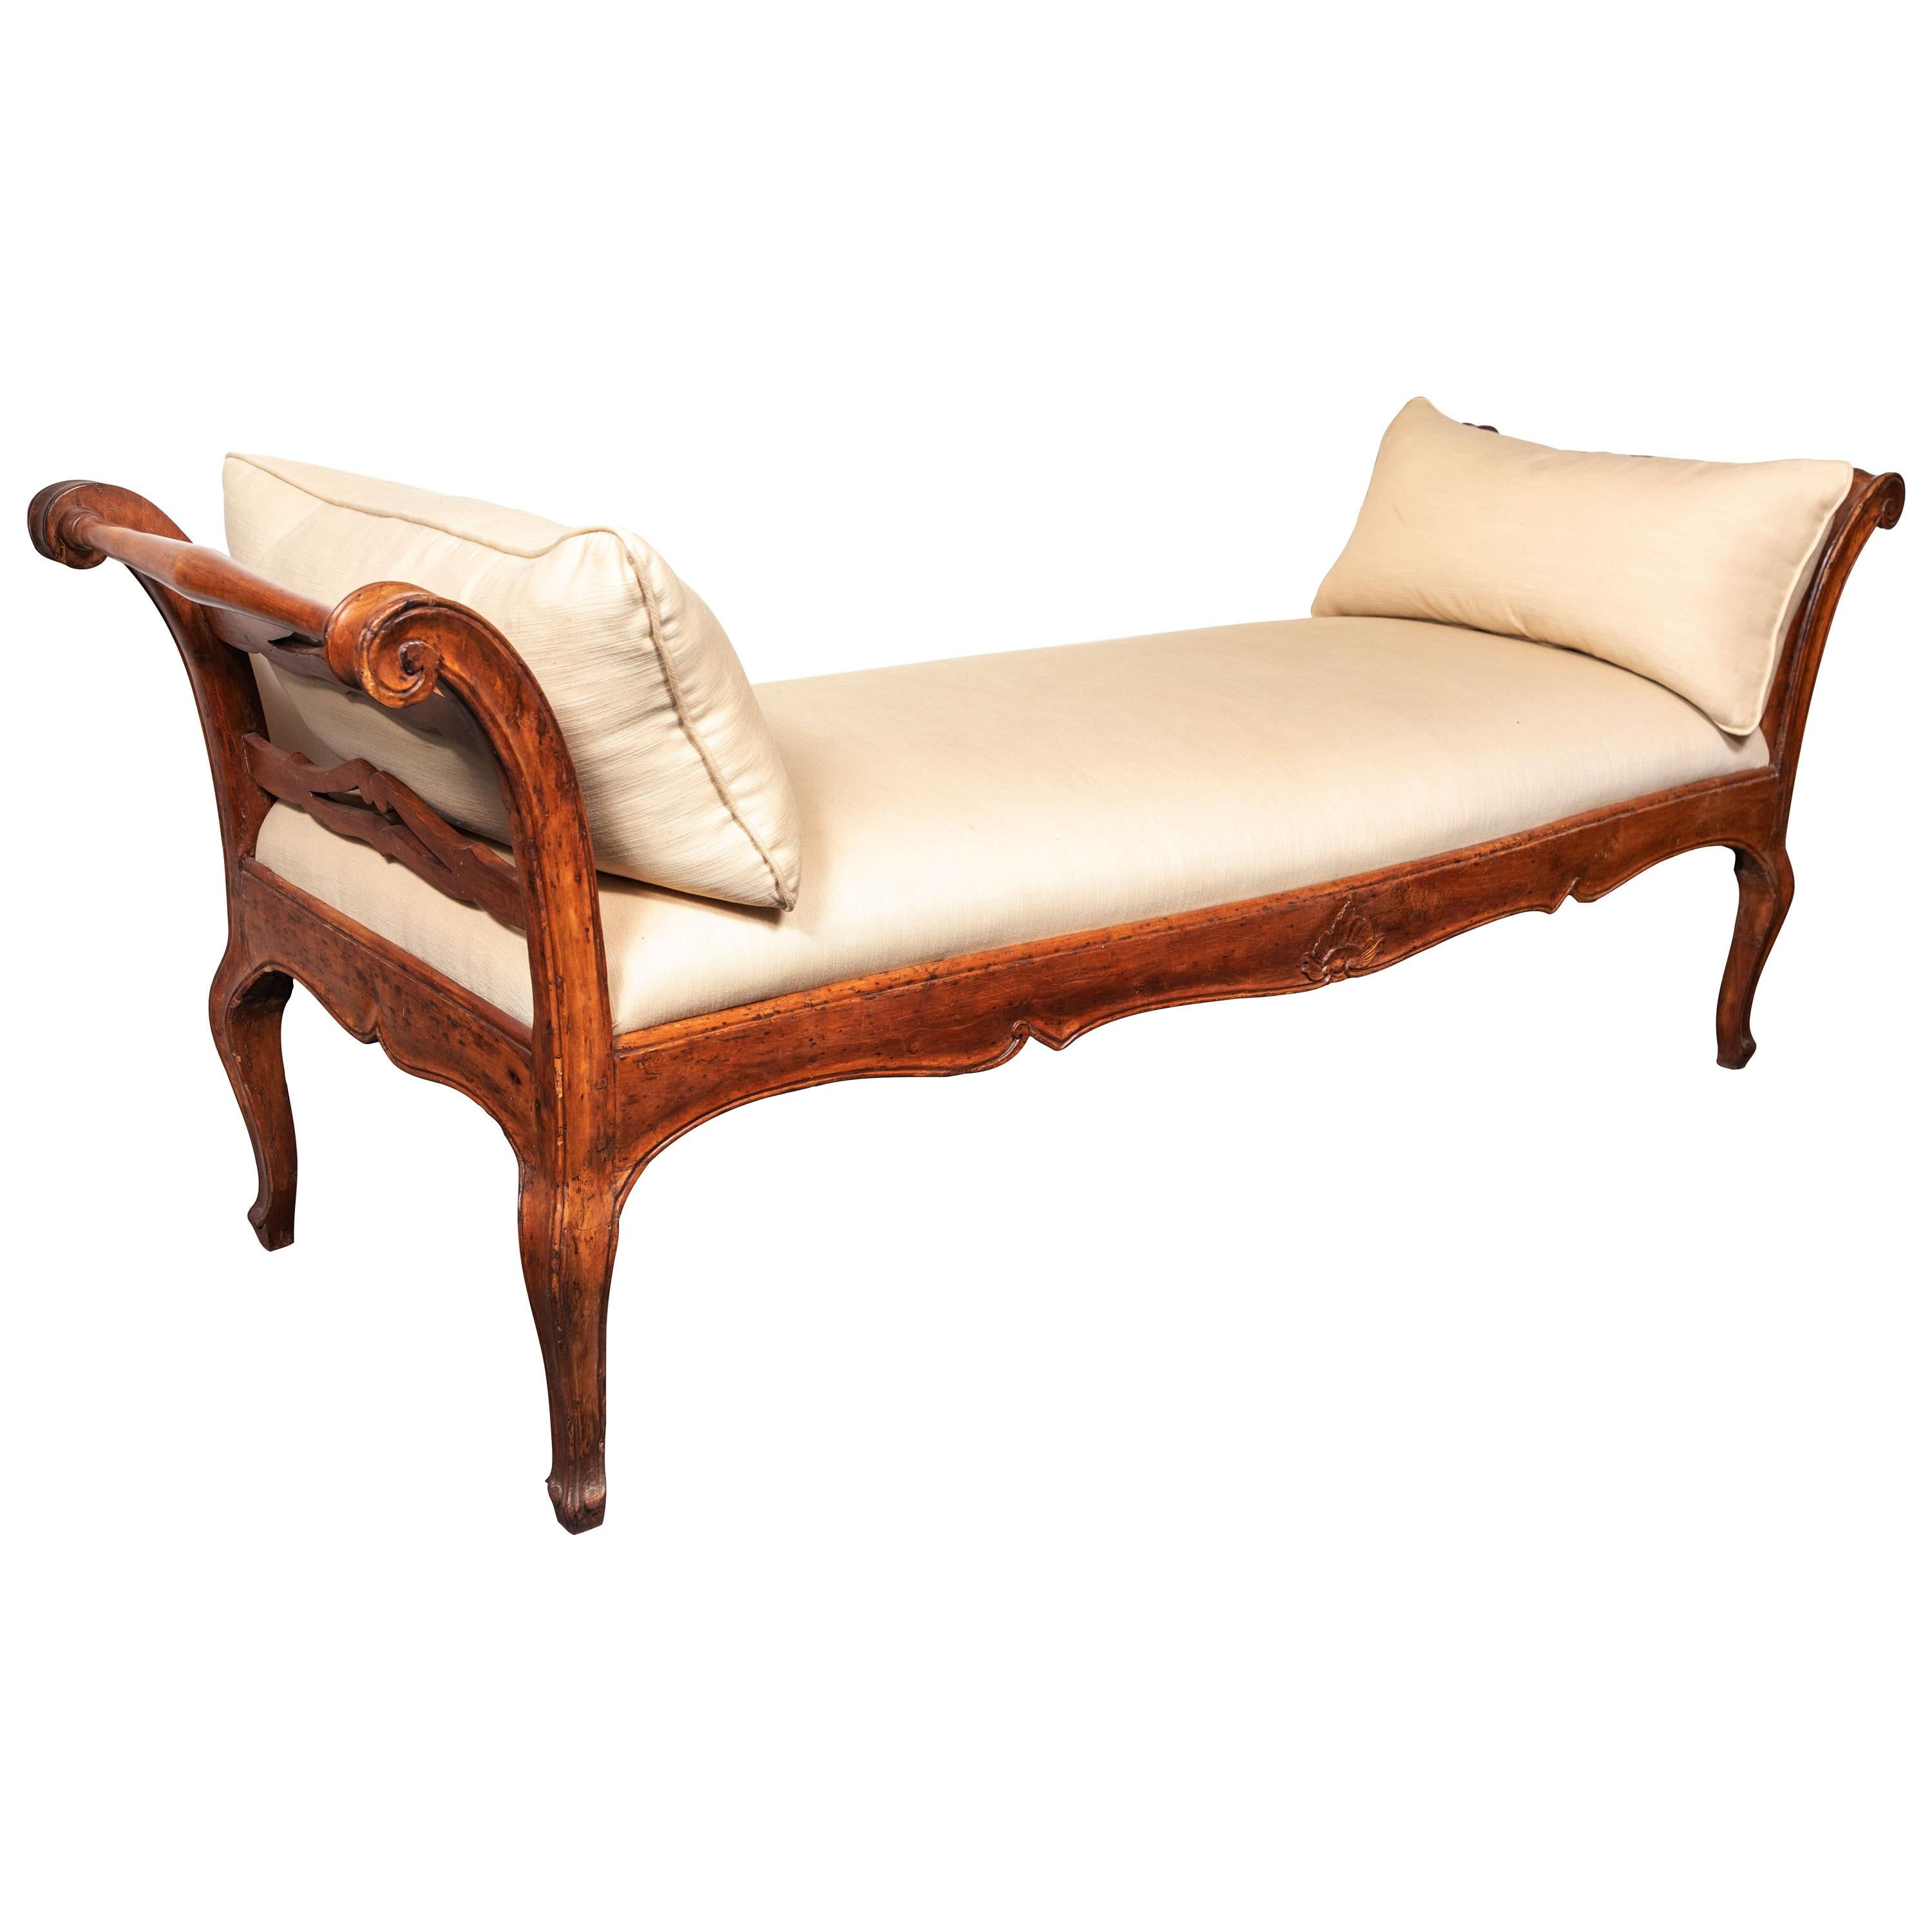 19th Century Northern Italian Day Bed